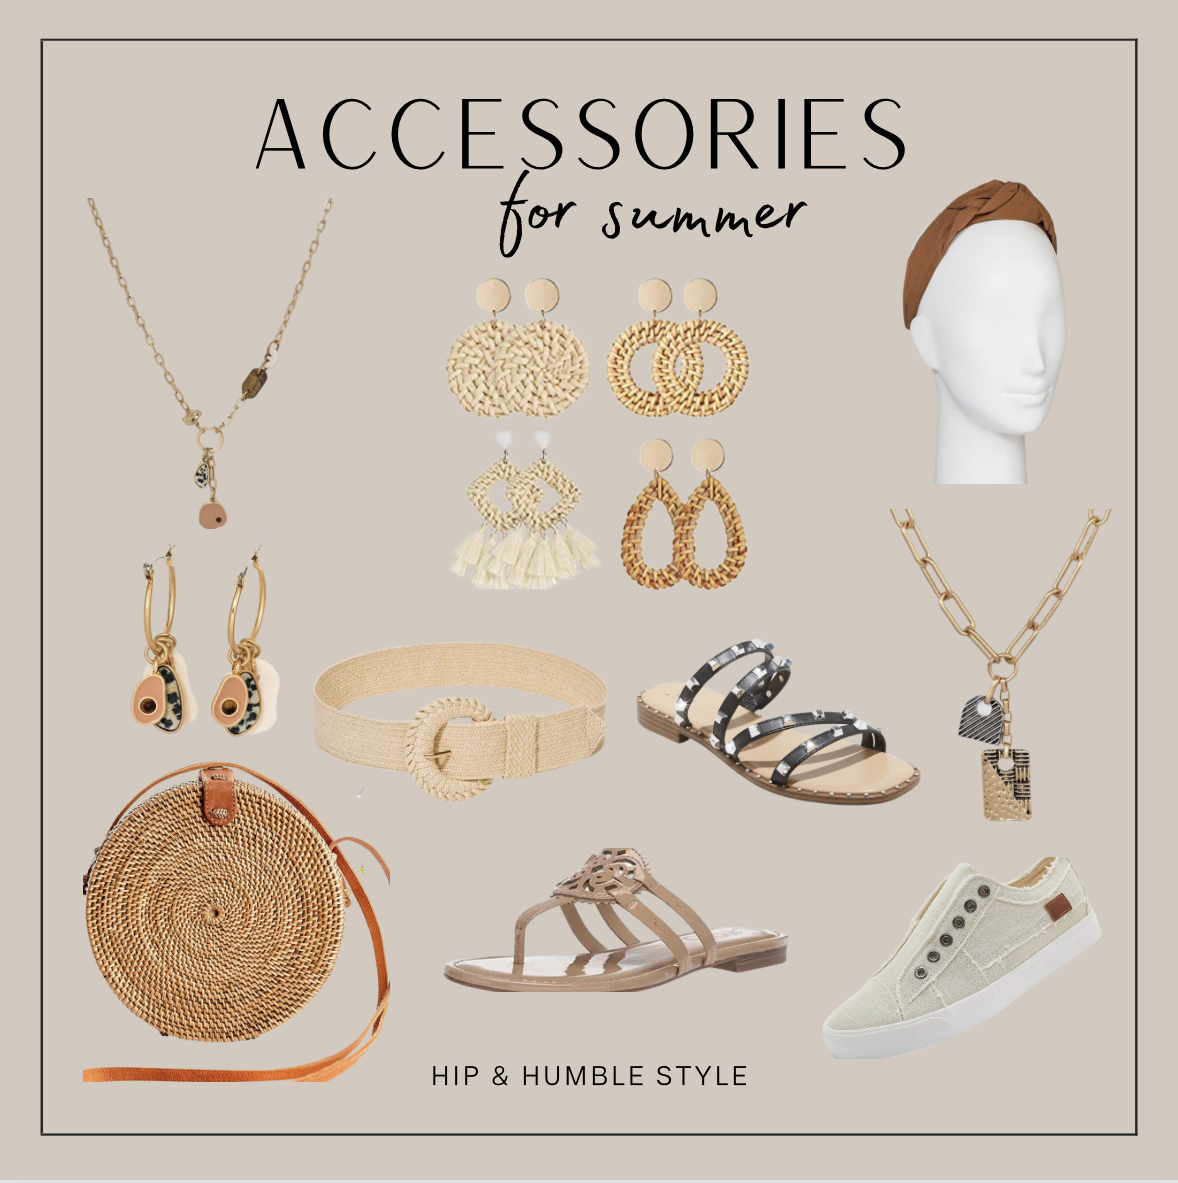 http://hipandhumblestyle.com/wp-content/uploads/2022/05/accessories-for-summer.jpg